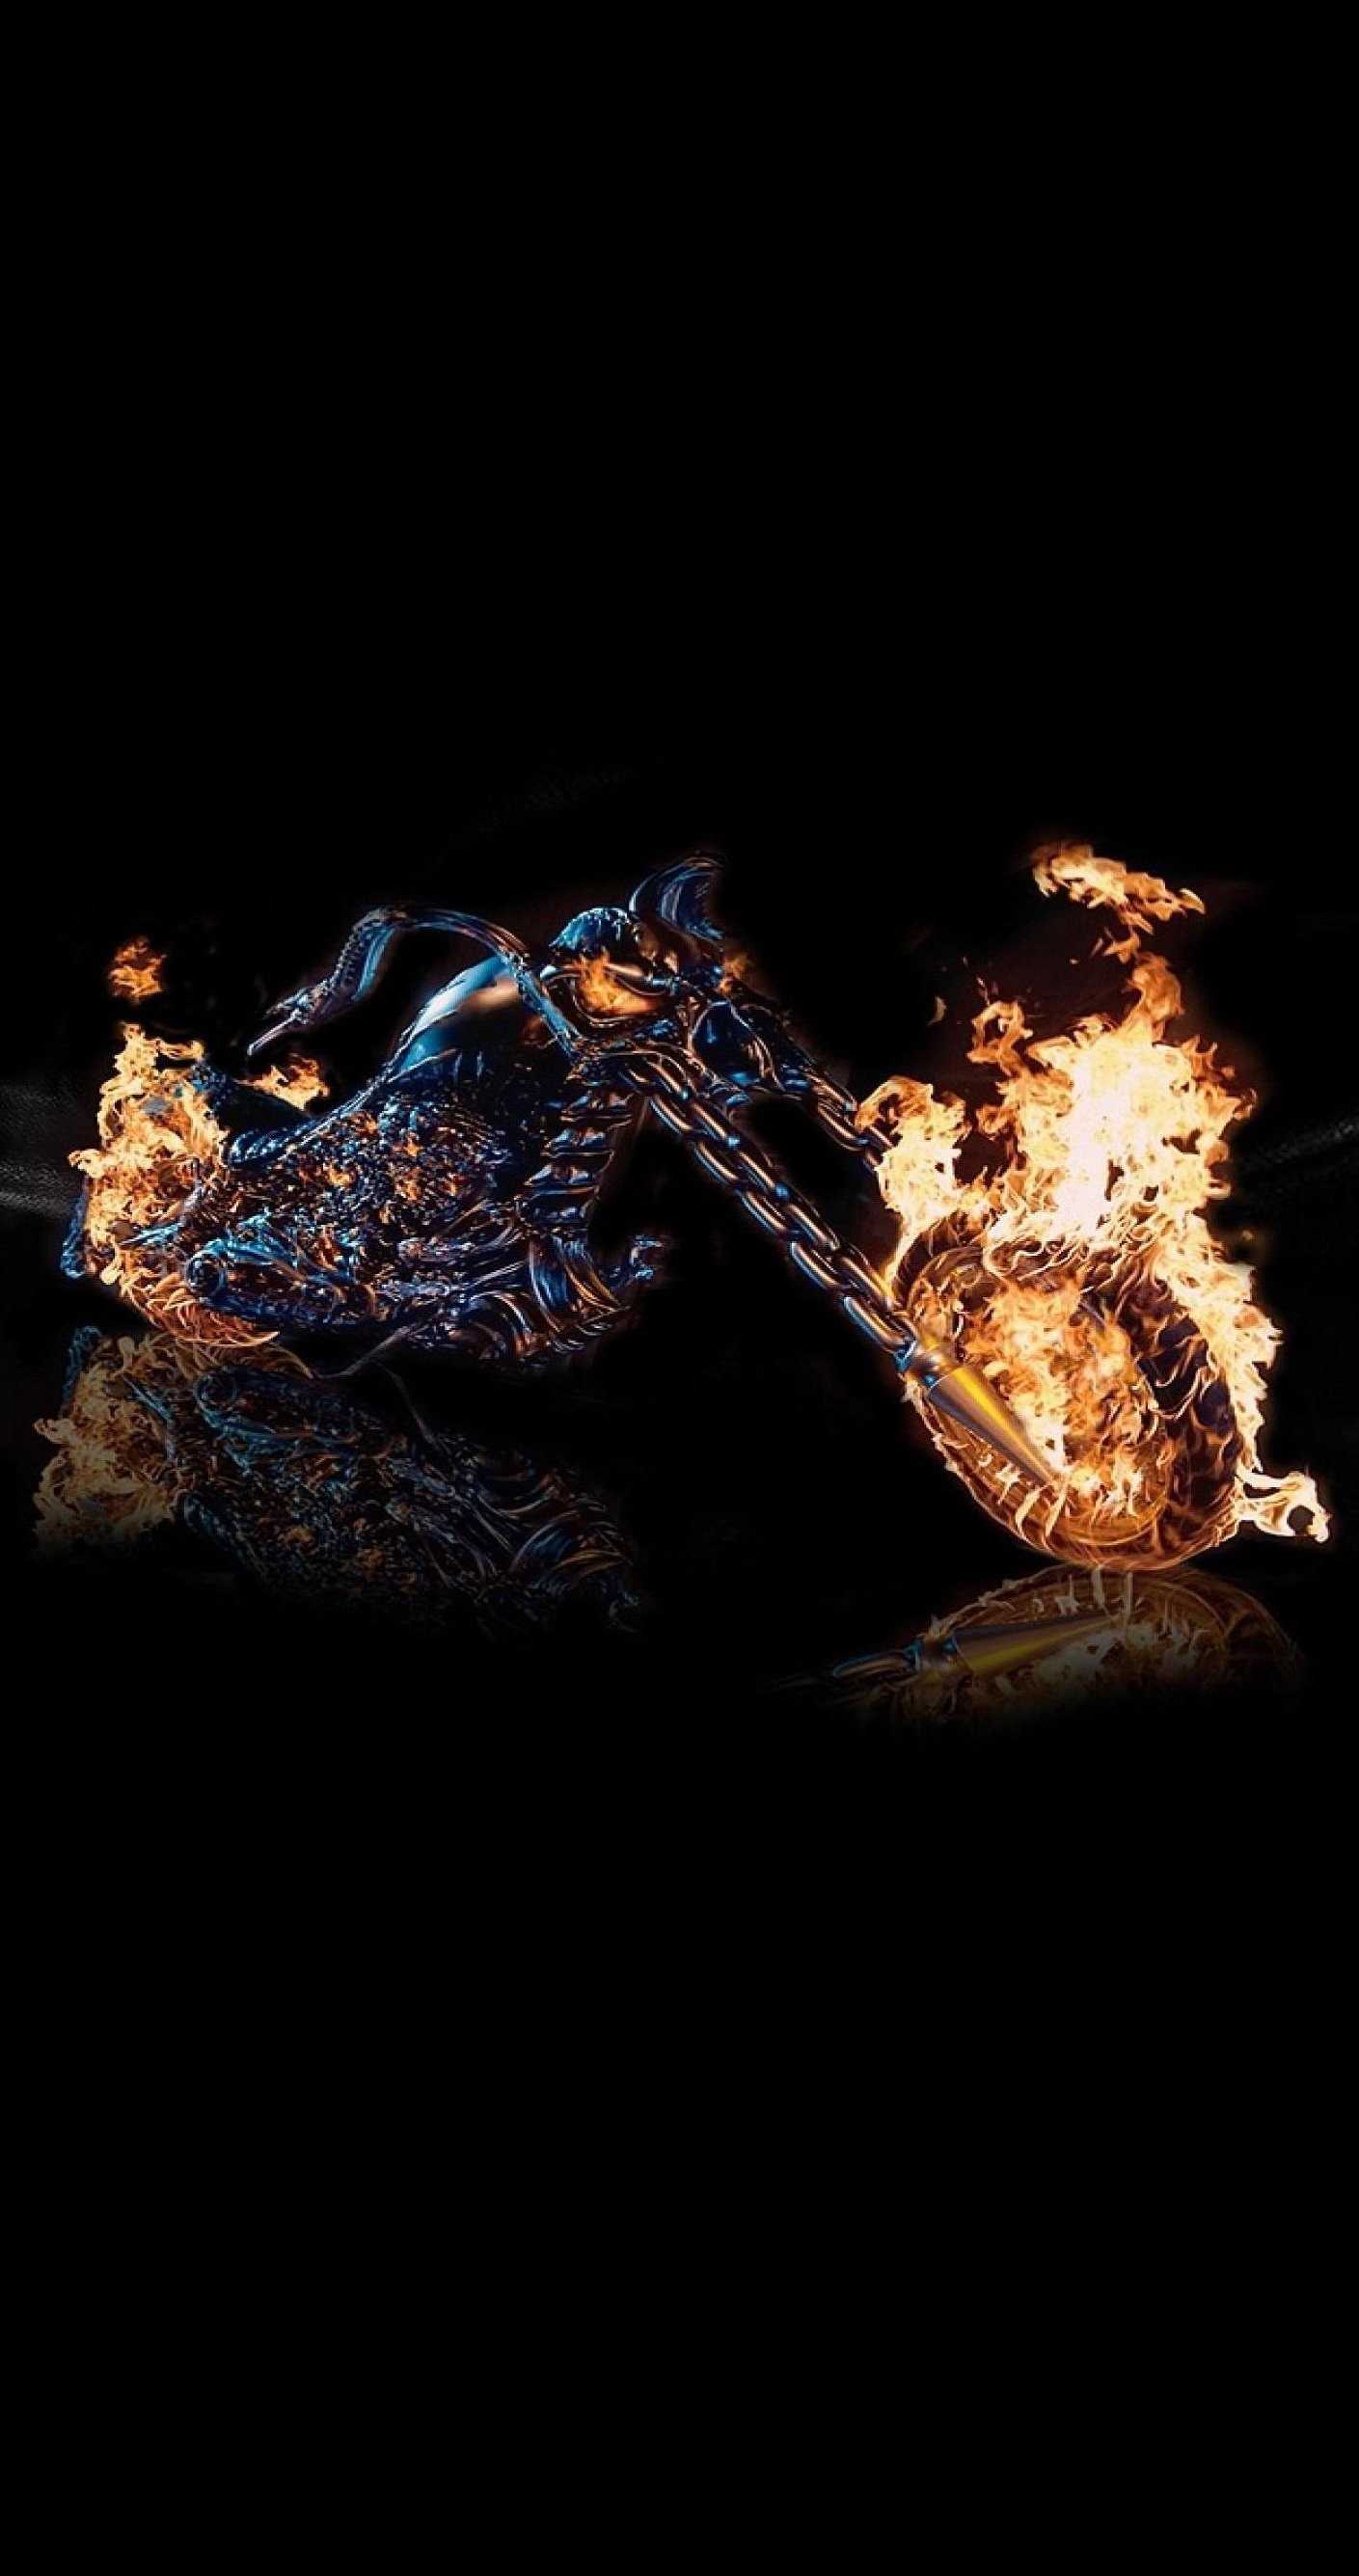 Motorcycle Ghost Rider Wallpaper 1